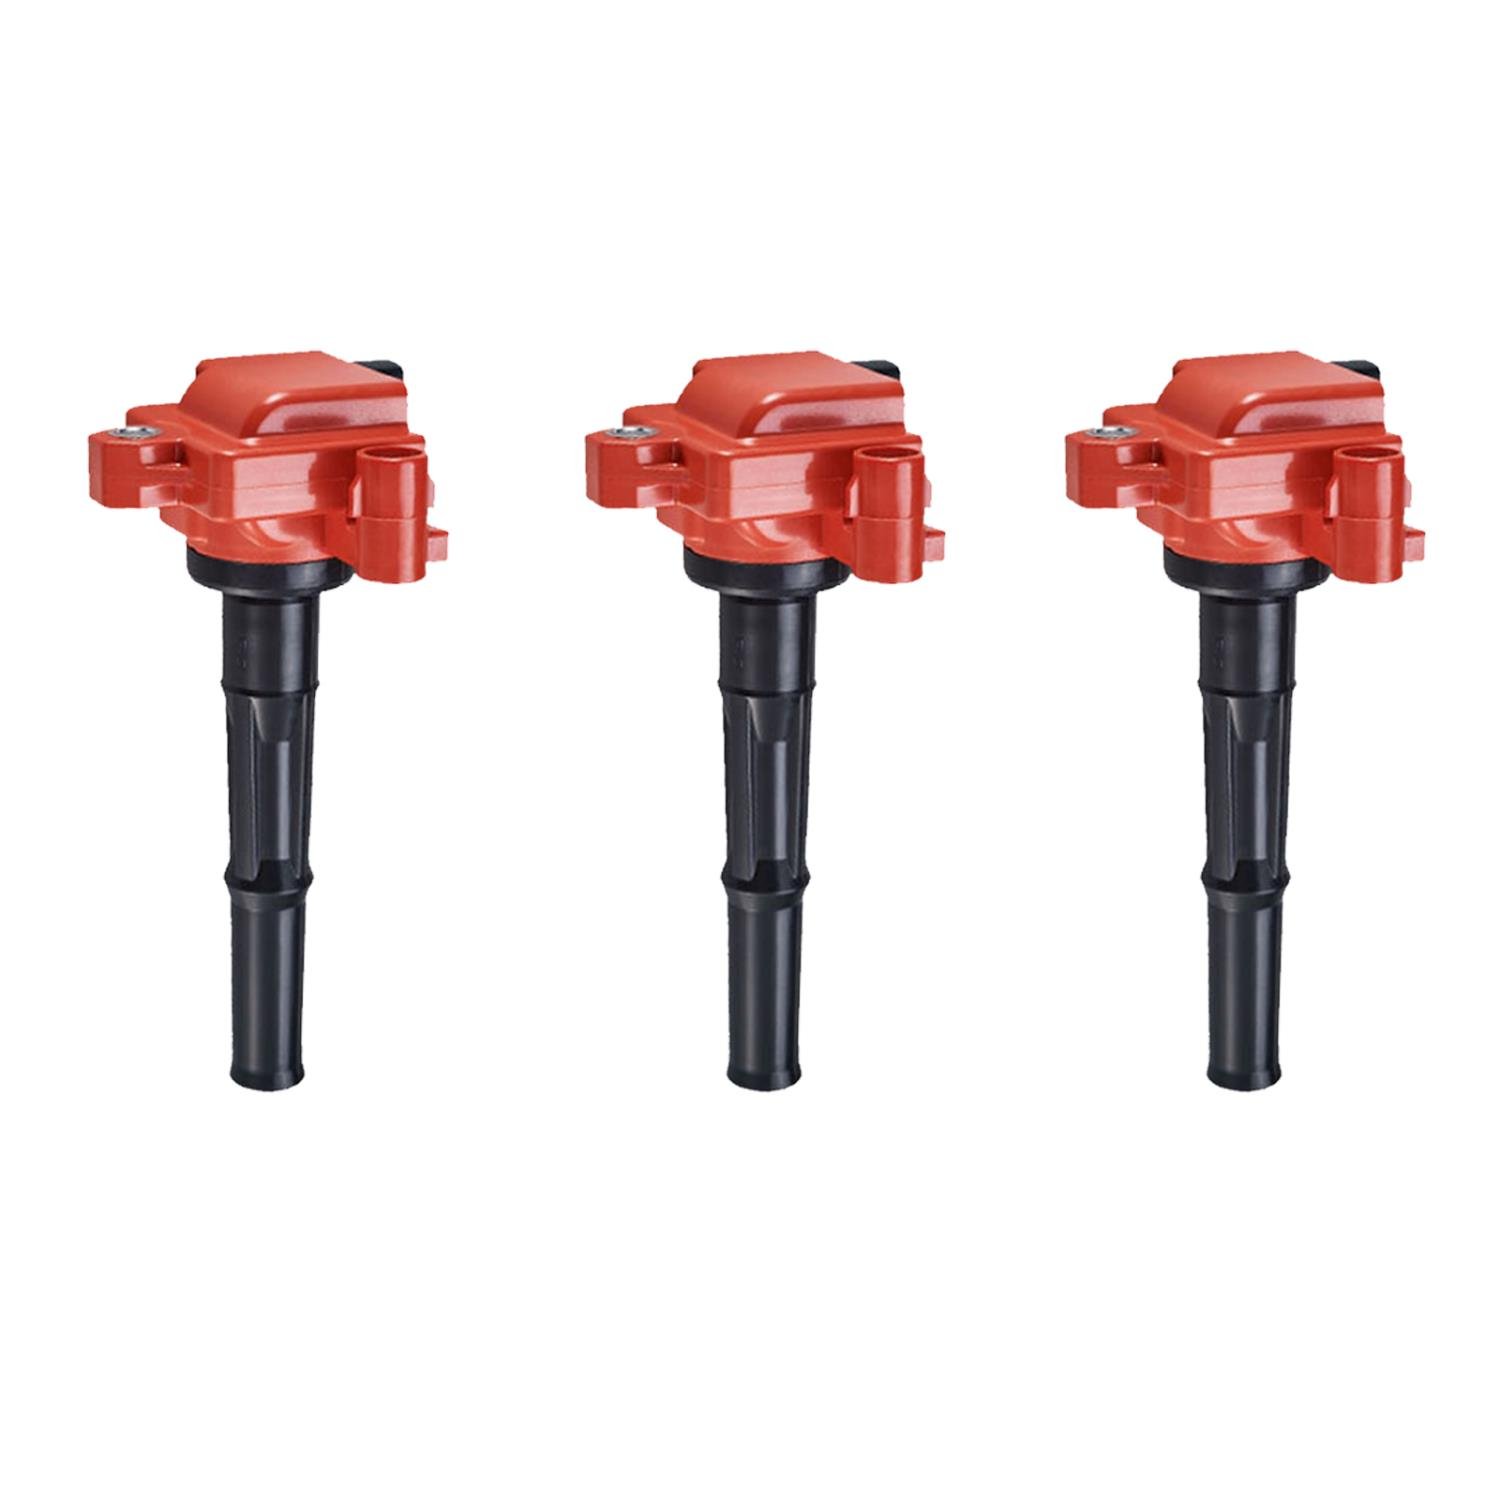 High-Performance Ignition Coils for Toyota Tacoma 3.4L [Red]